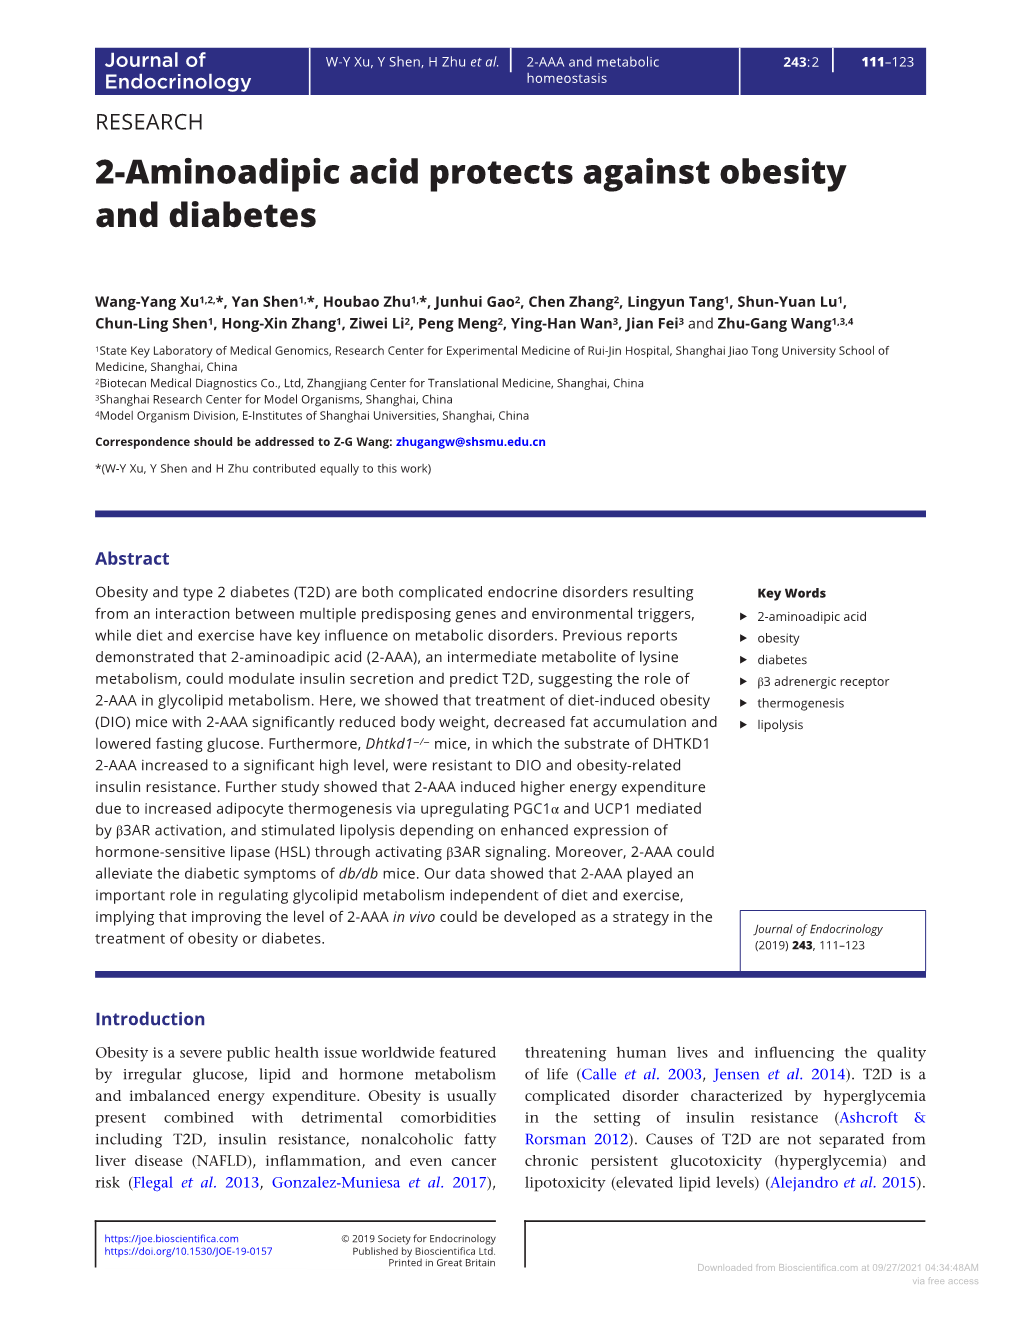 2-Aminoadipic Acid Protects Against Obesity and Diabetes